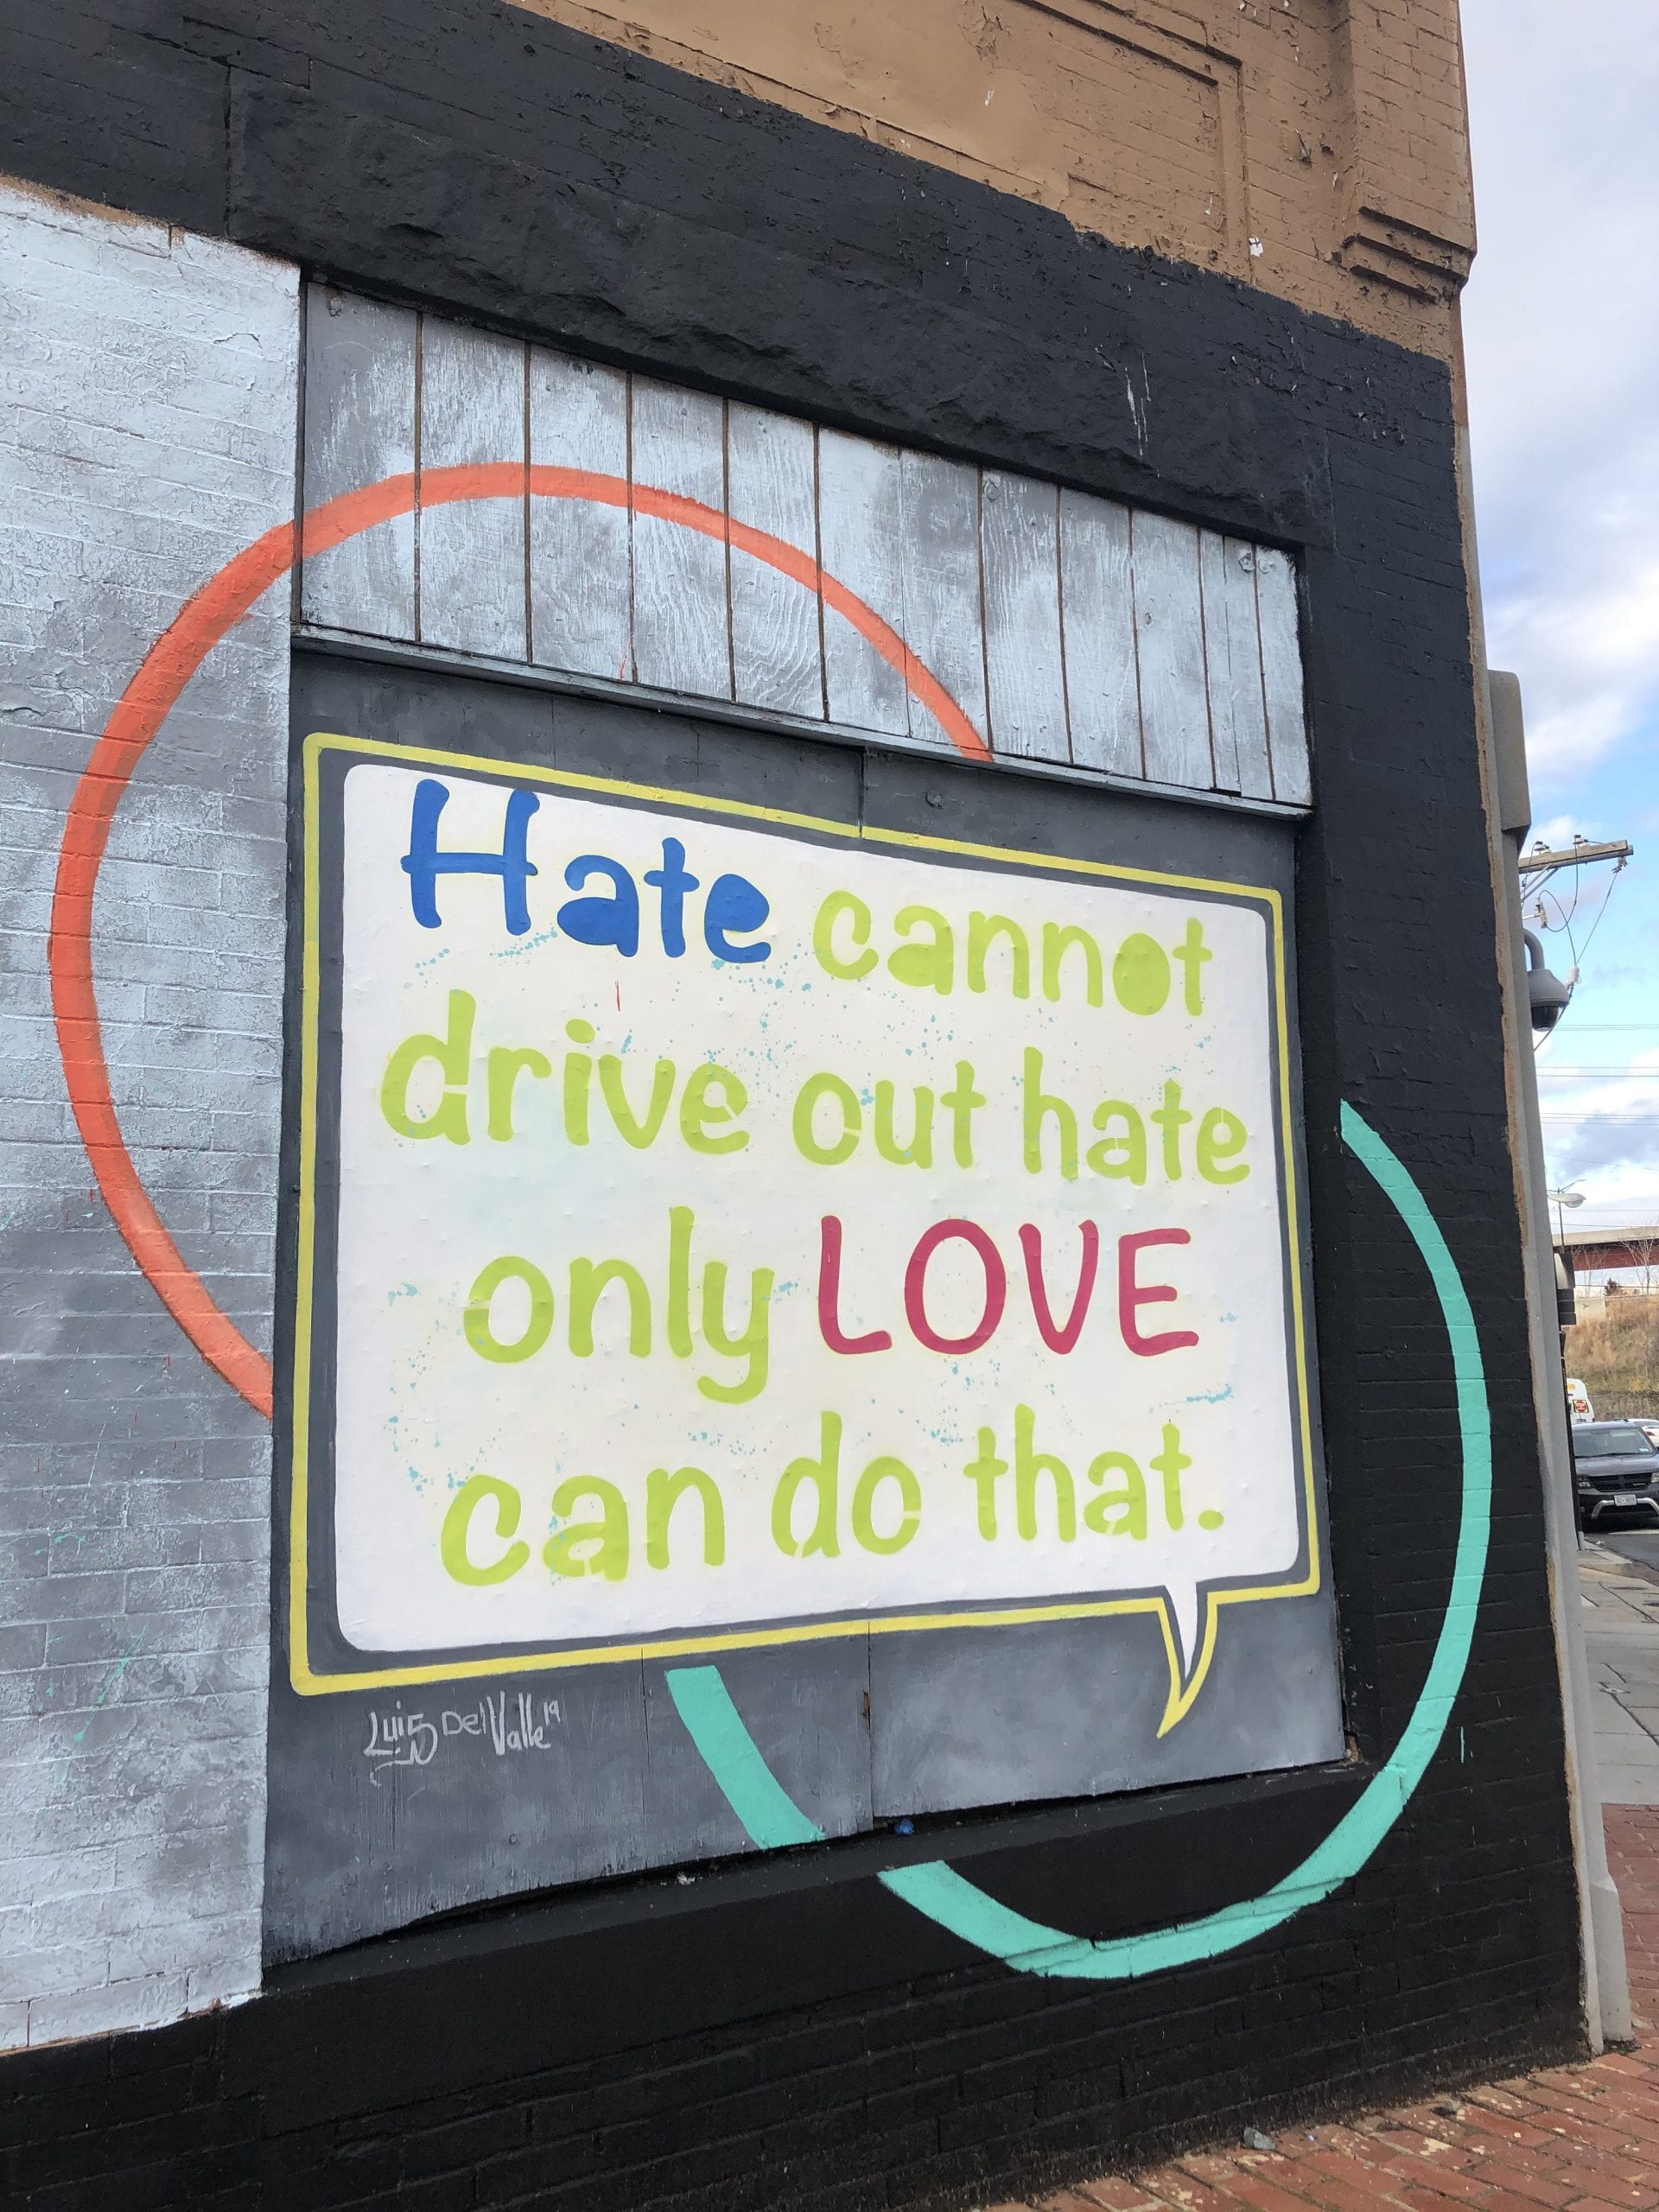 A colorful sign reading "Hate cannot drive out hate. Only Love can do that" with a metal background